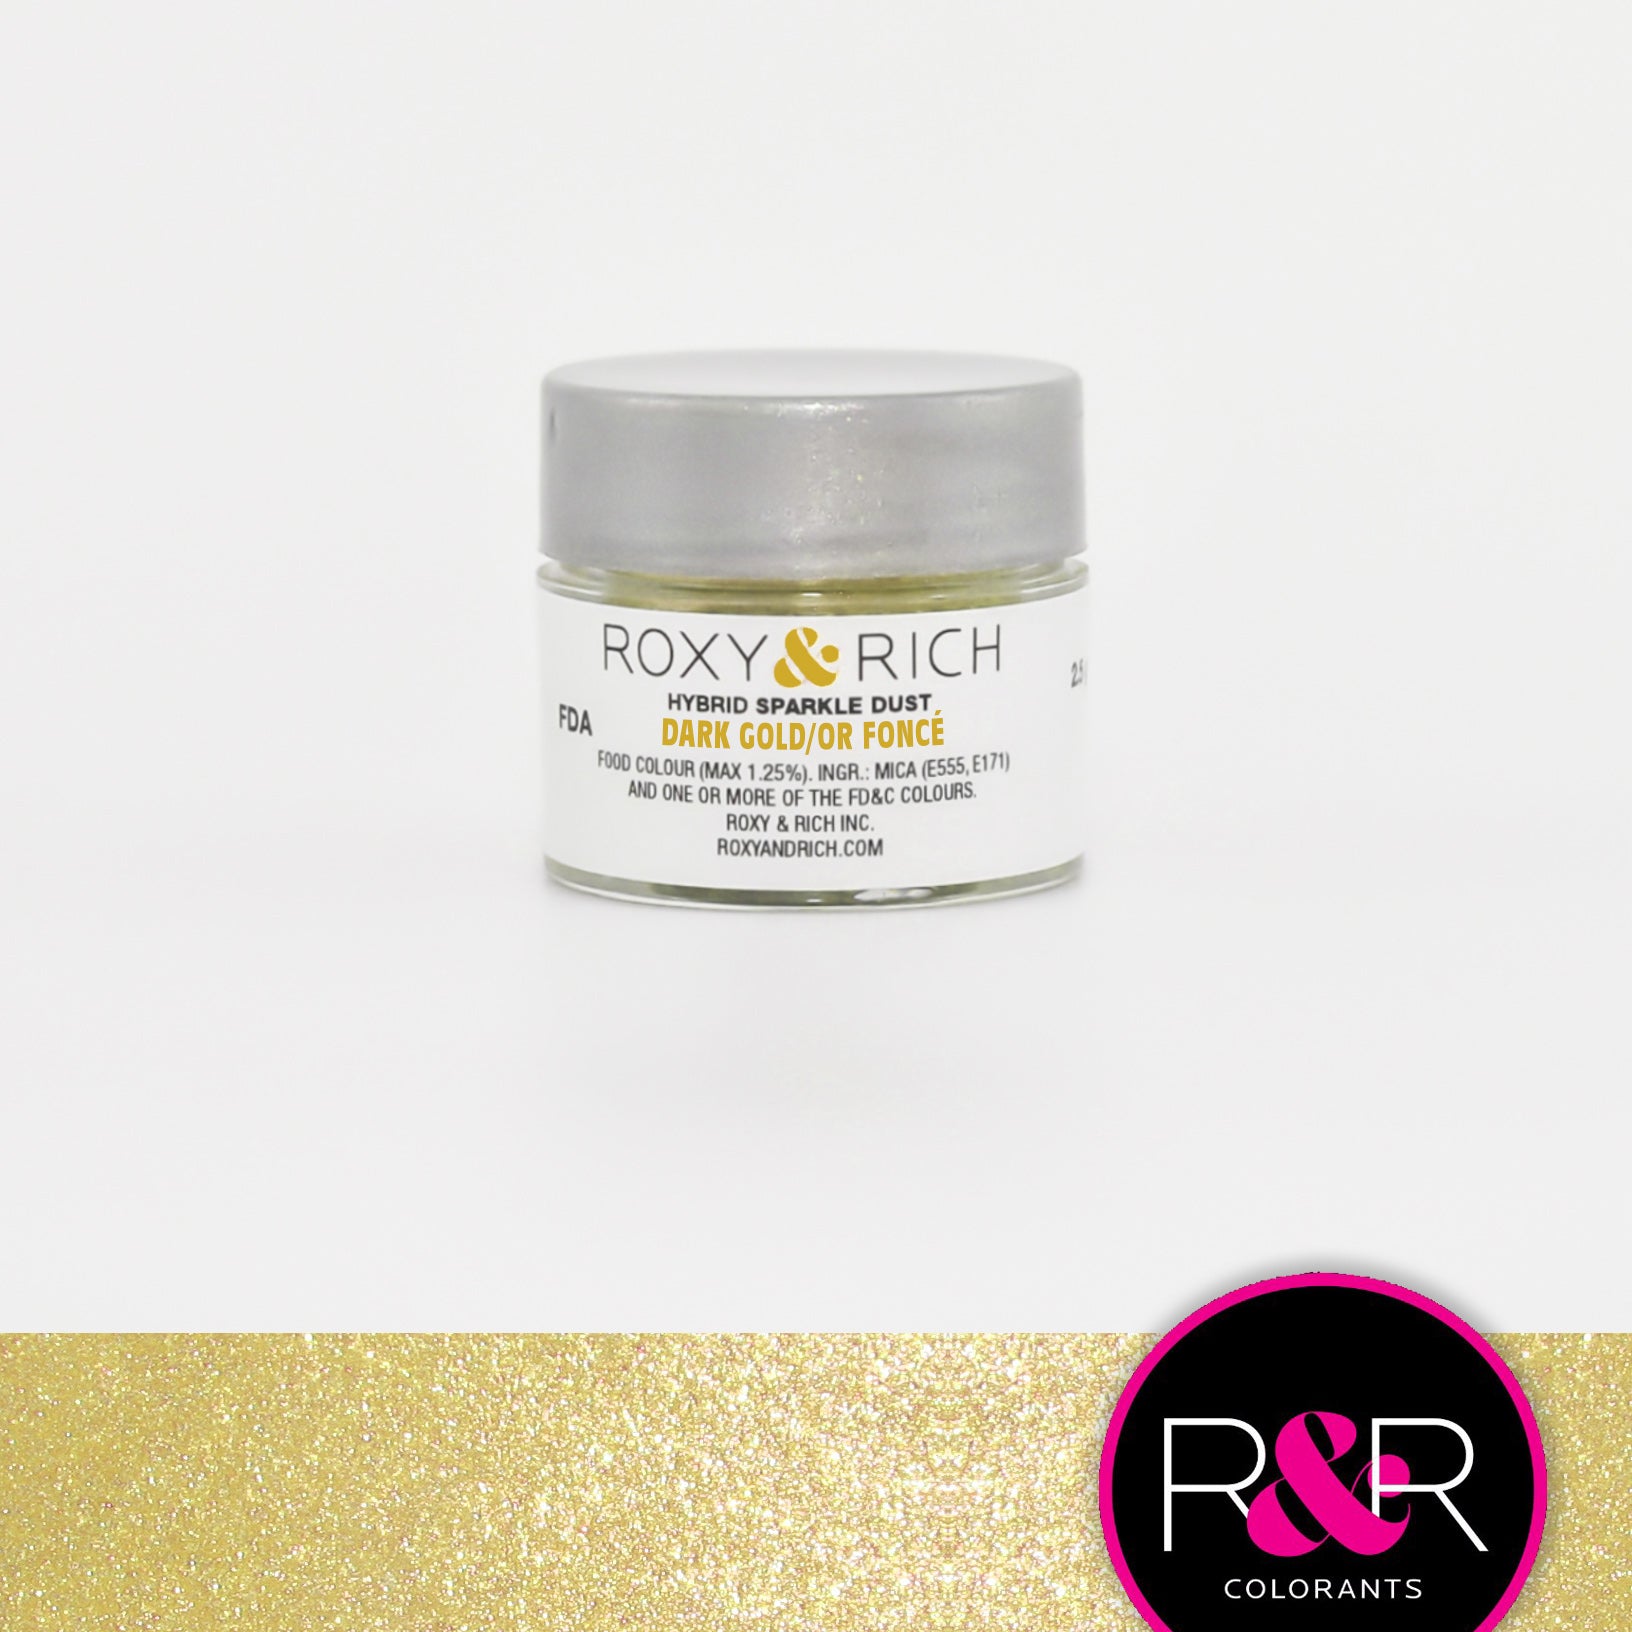 Buy Confect Shimmer Gold Luster Dust Sugar Paste - For The Love Of